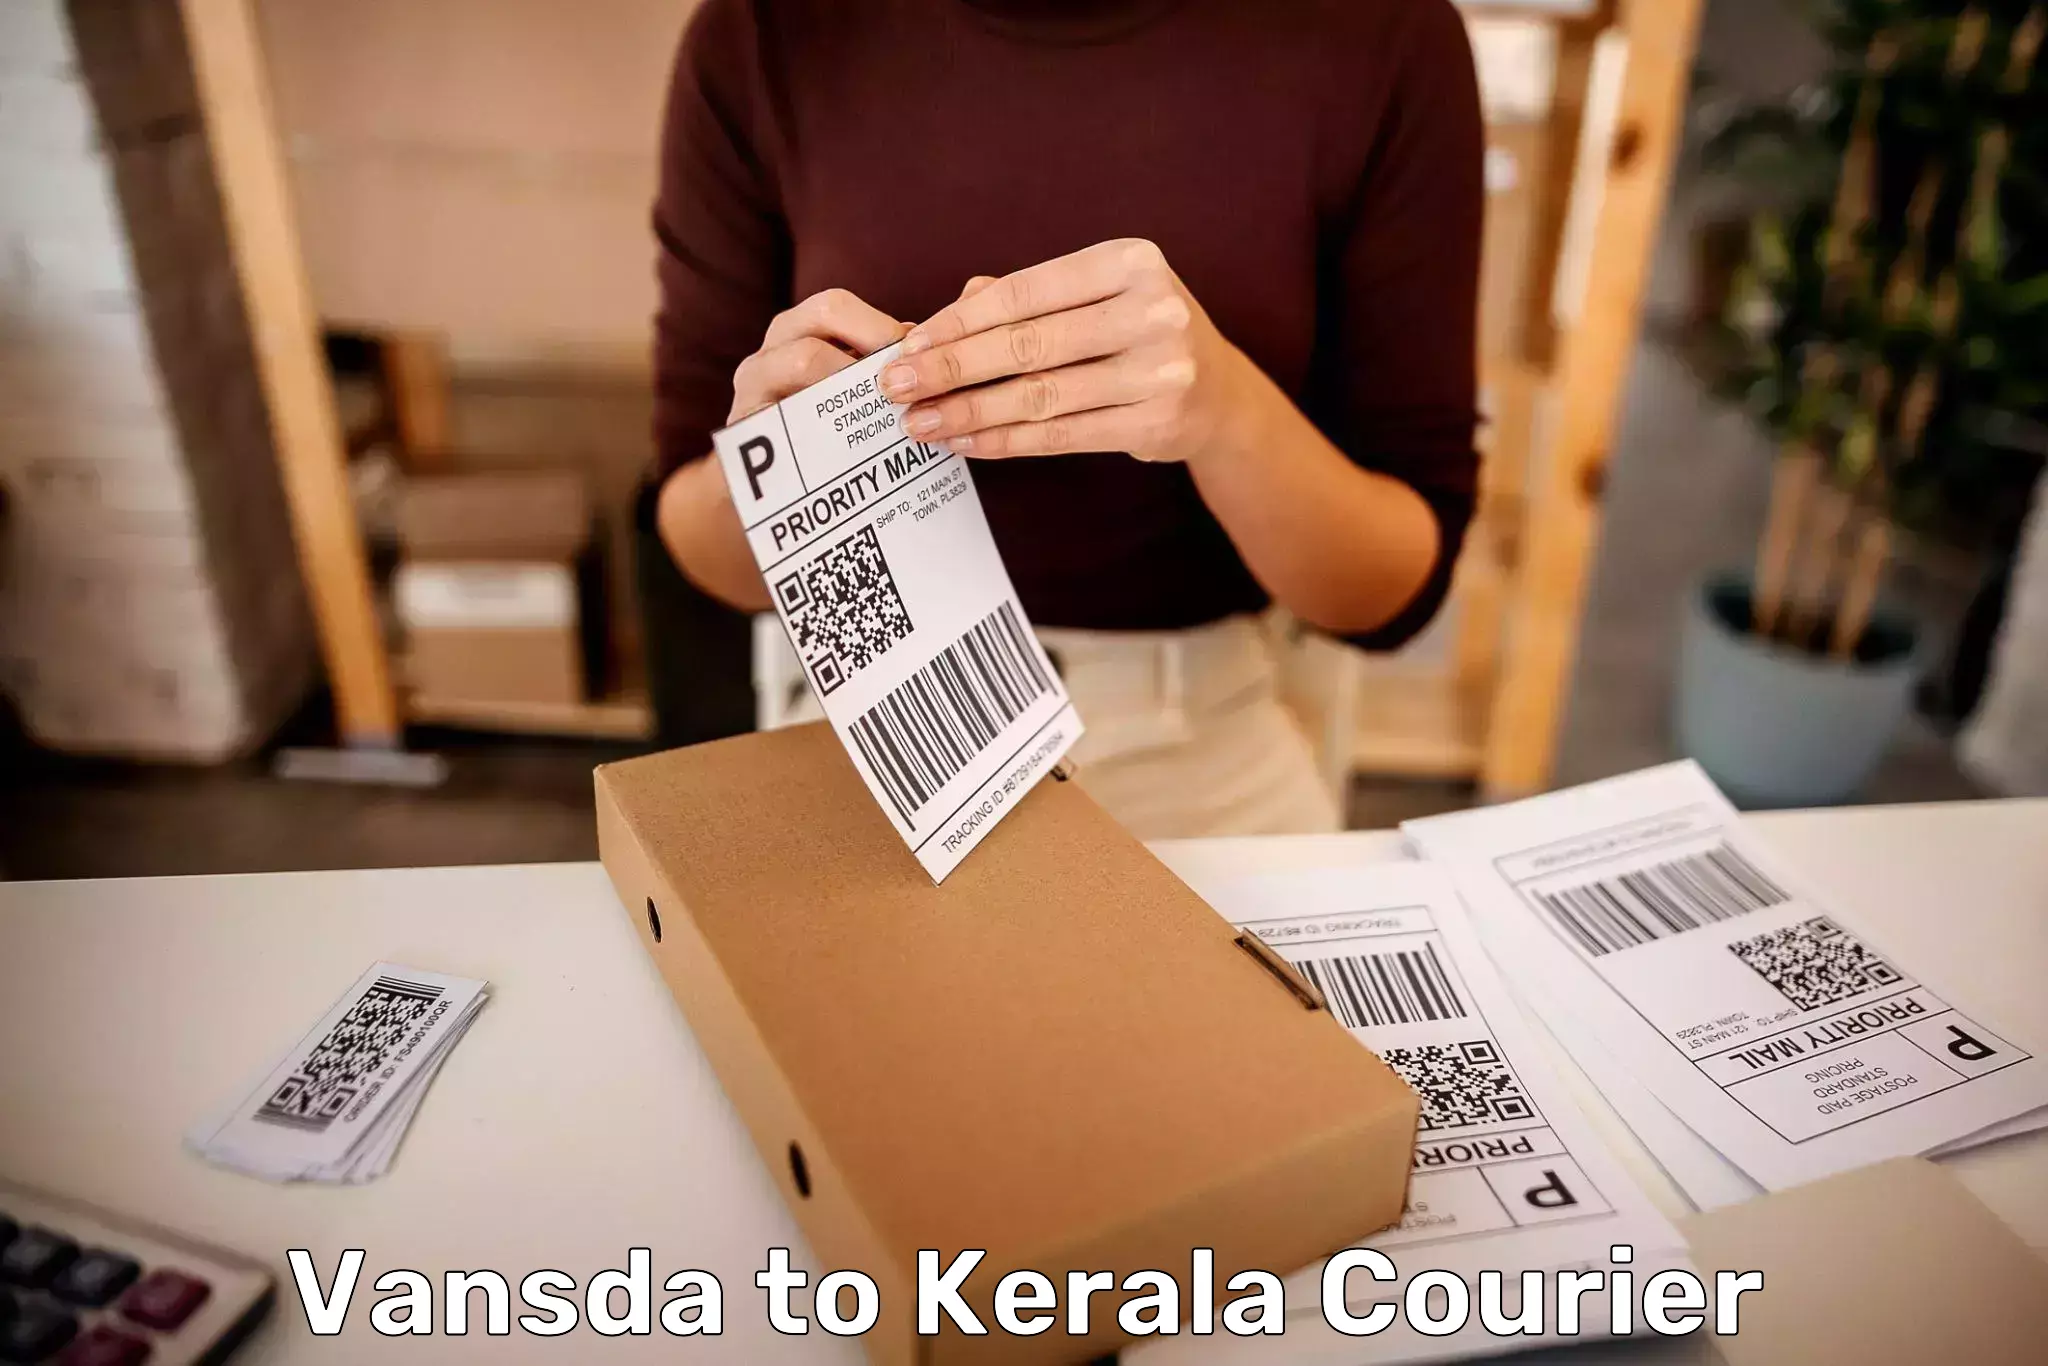 Luggage delivery app Vansda to Cochin University of Science and Technology